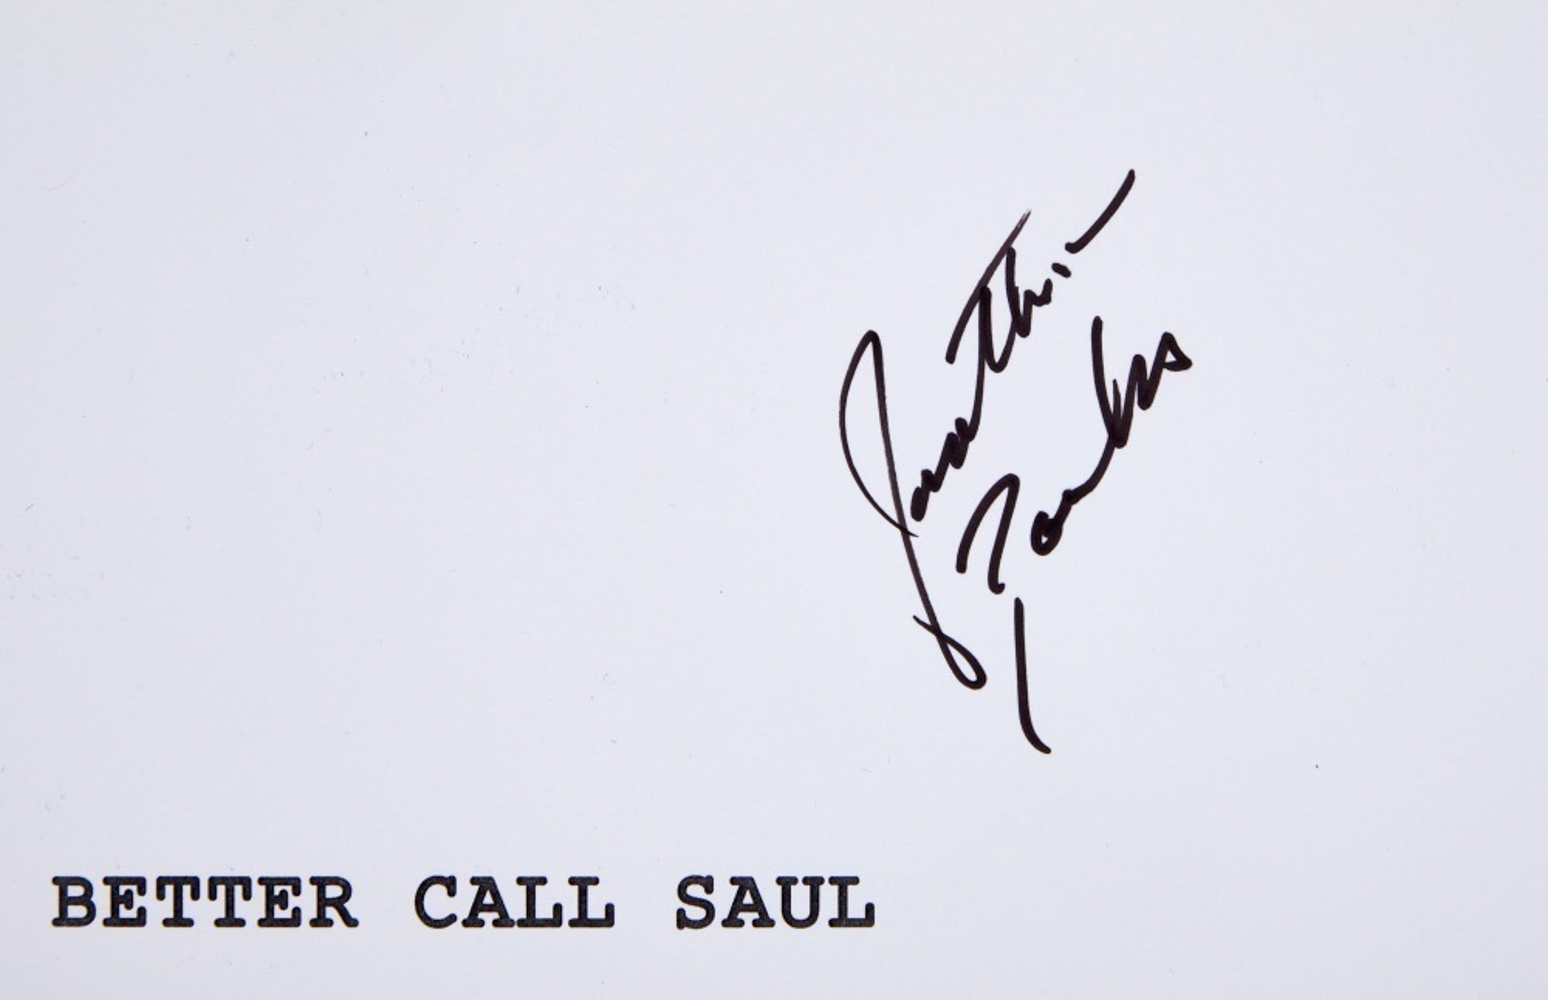 BETTER CALL SAUL | CAST AND CREATOR-SIGNED "SWITCH" SCRIPT COVER - Image 2 of 5